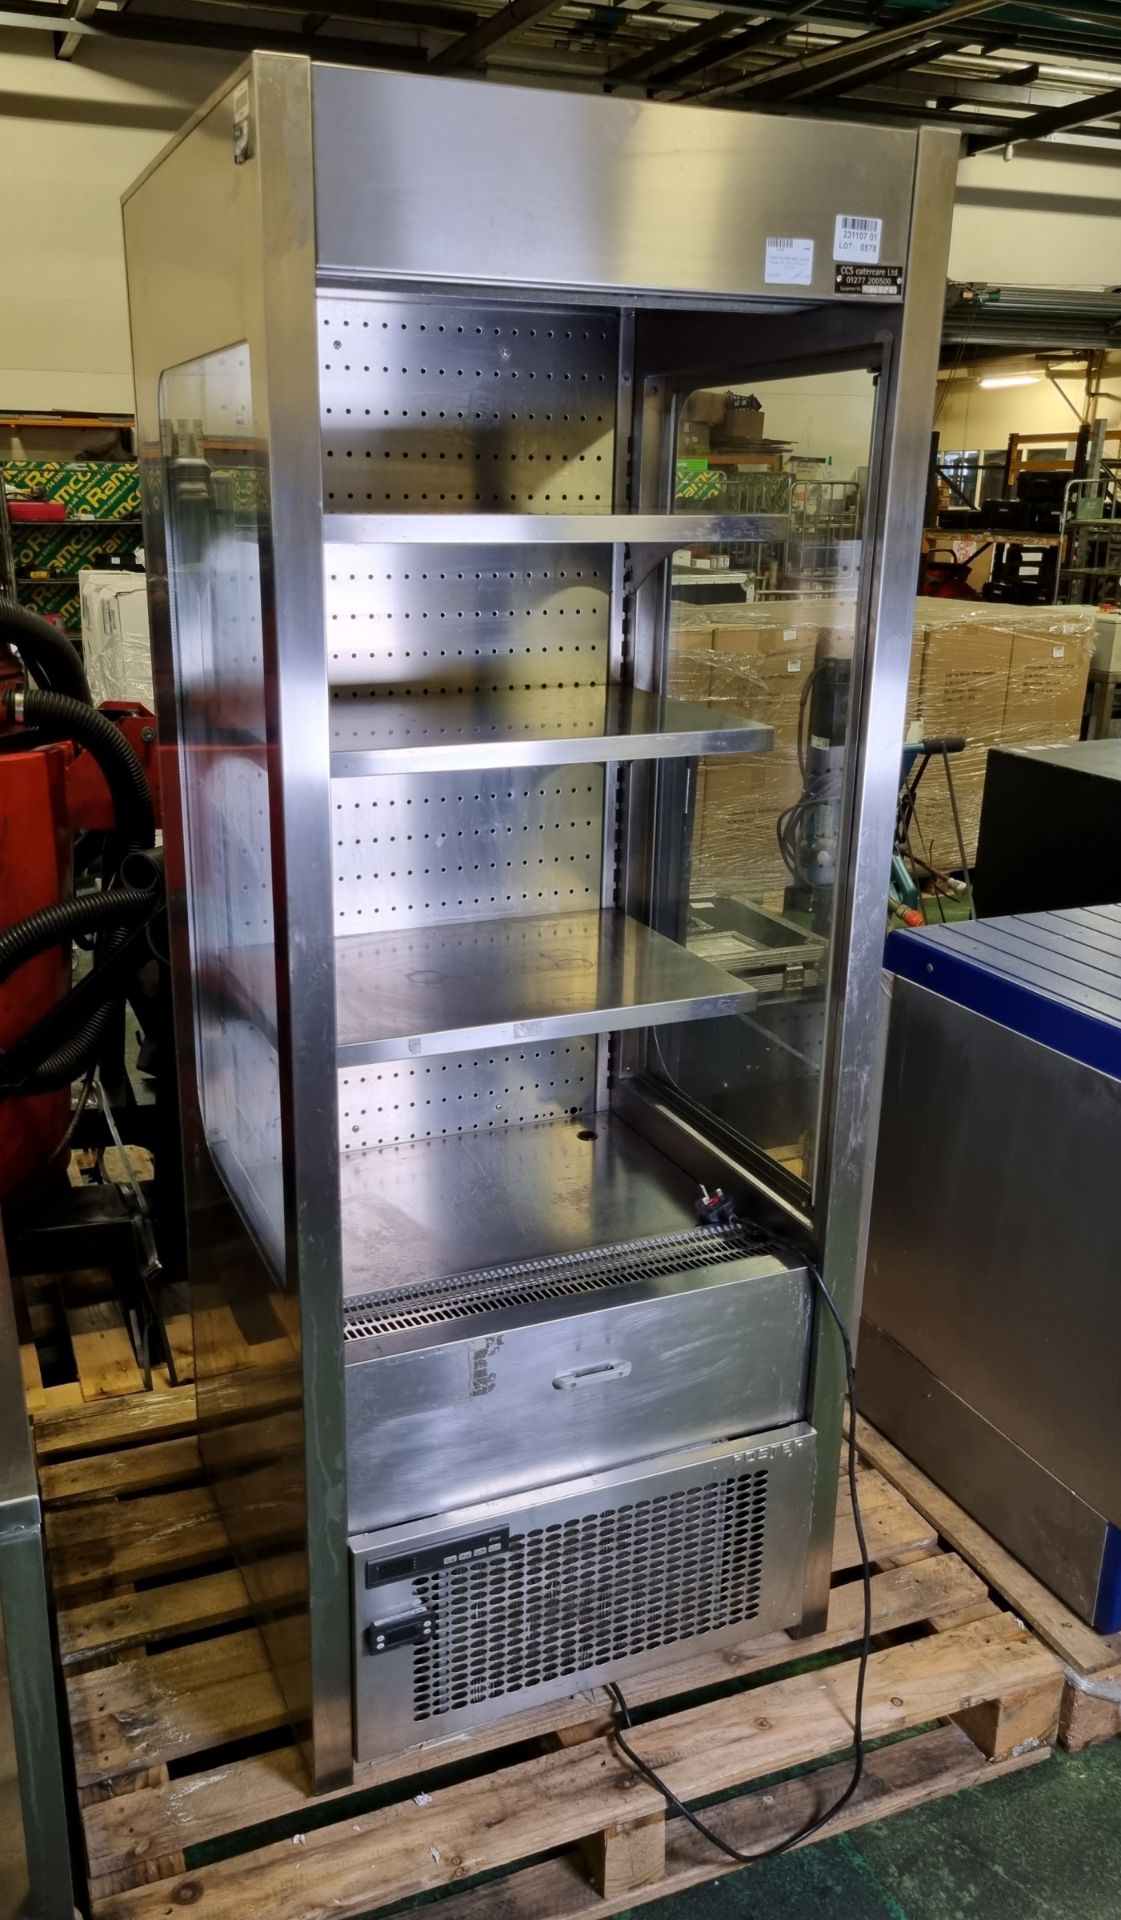 Foster stainless steel upright fridge - W 700 x D 700 x H 1770 mm - Image 2 of 3